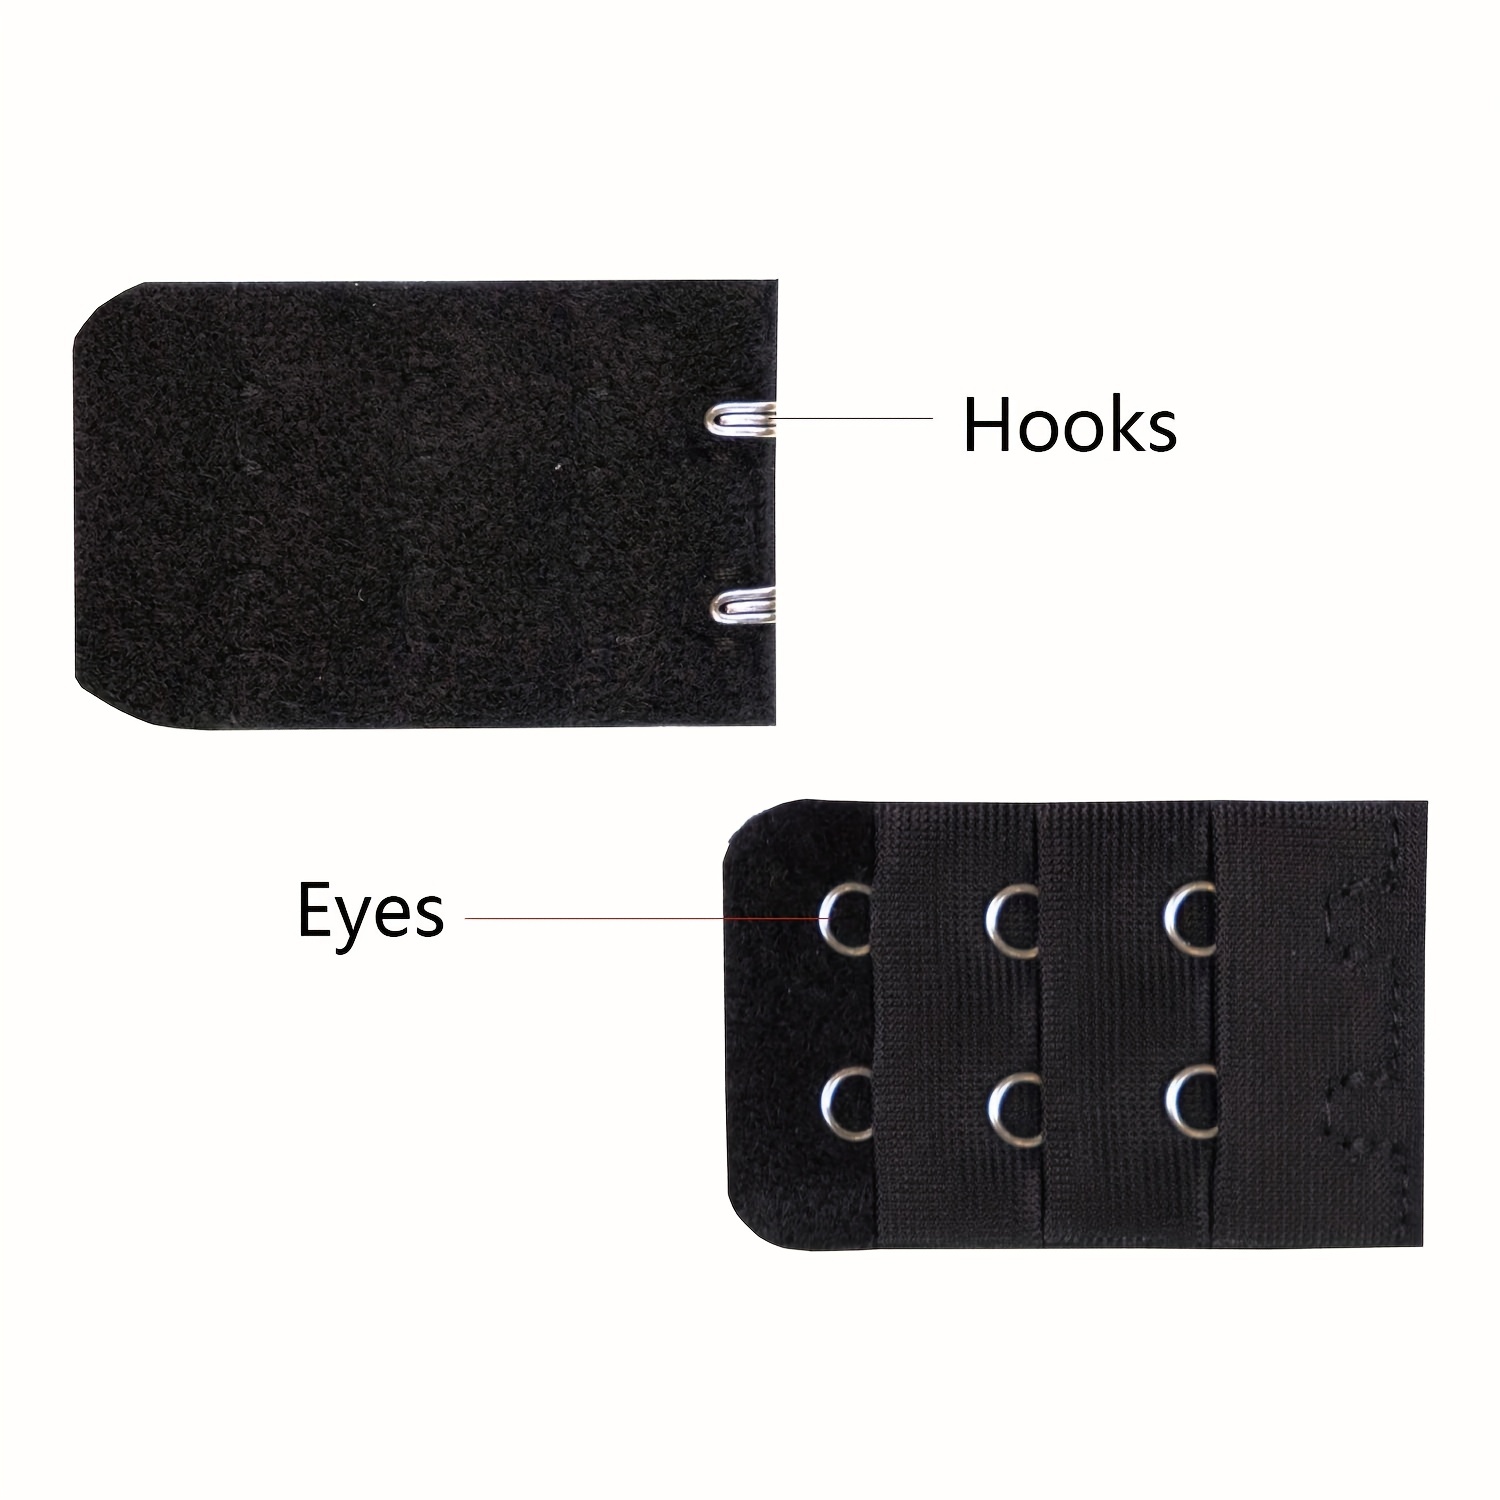 10 Sets Sewing Hooks And Eyes Closure For Trousers Skirts Dress Sewing DIY  Craft - Grey Black